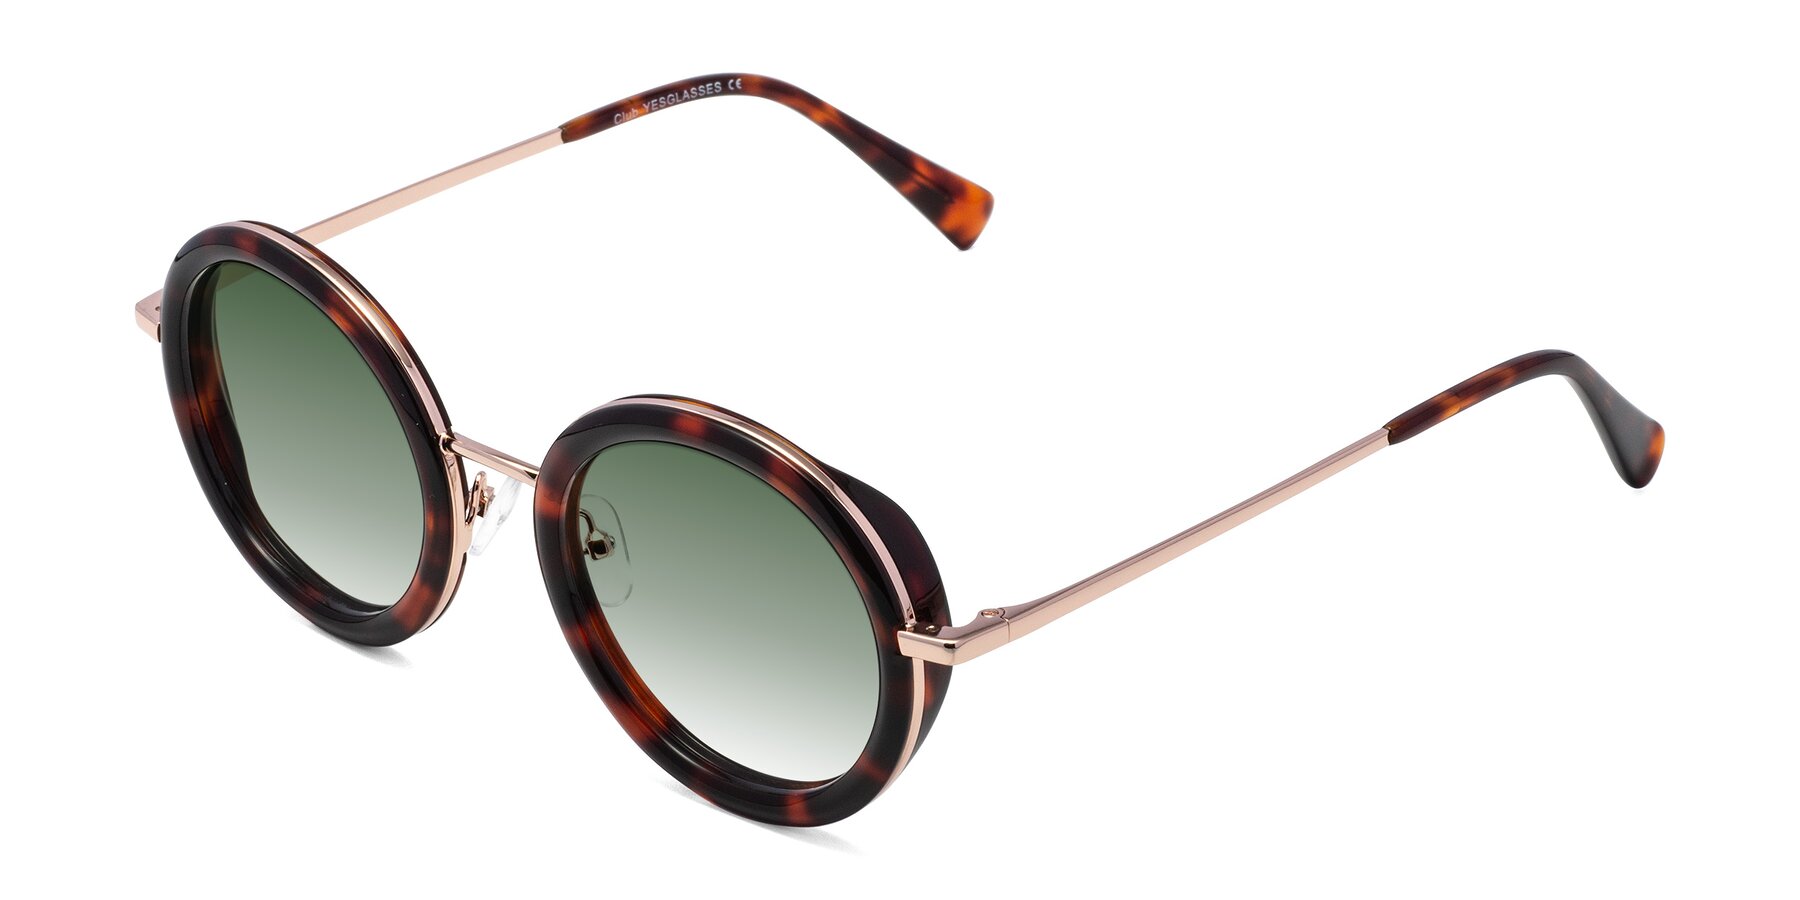 Angle of Club in Tortoise-Rose Gold with Green Gradient Lenses